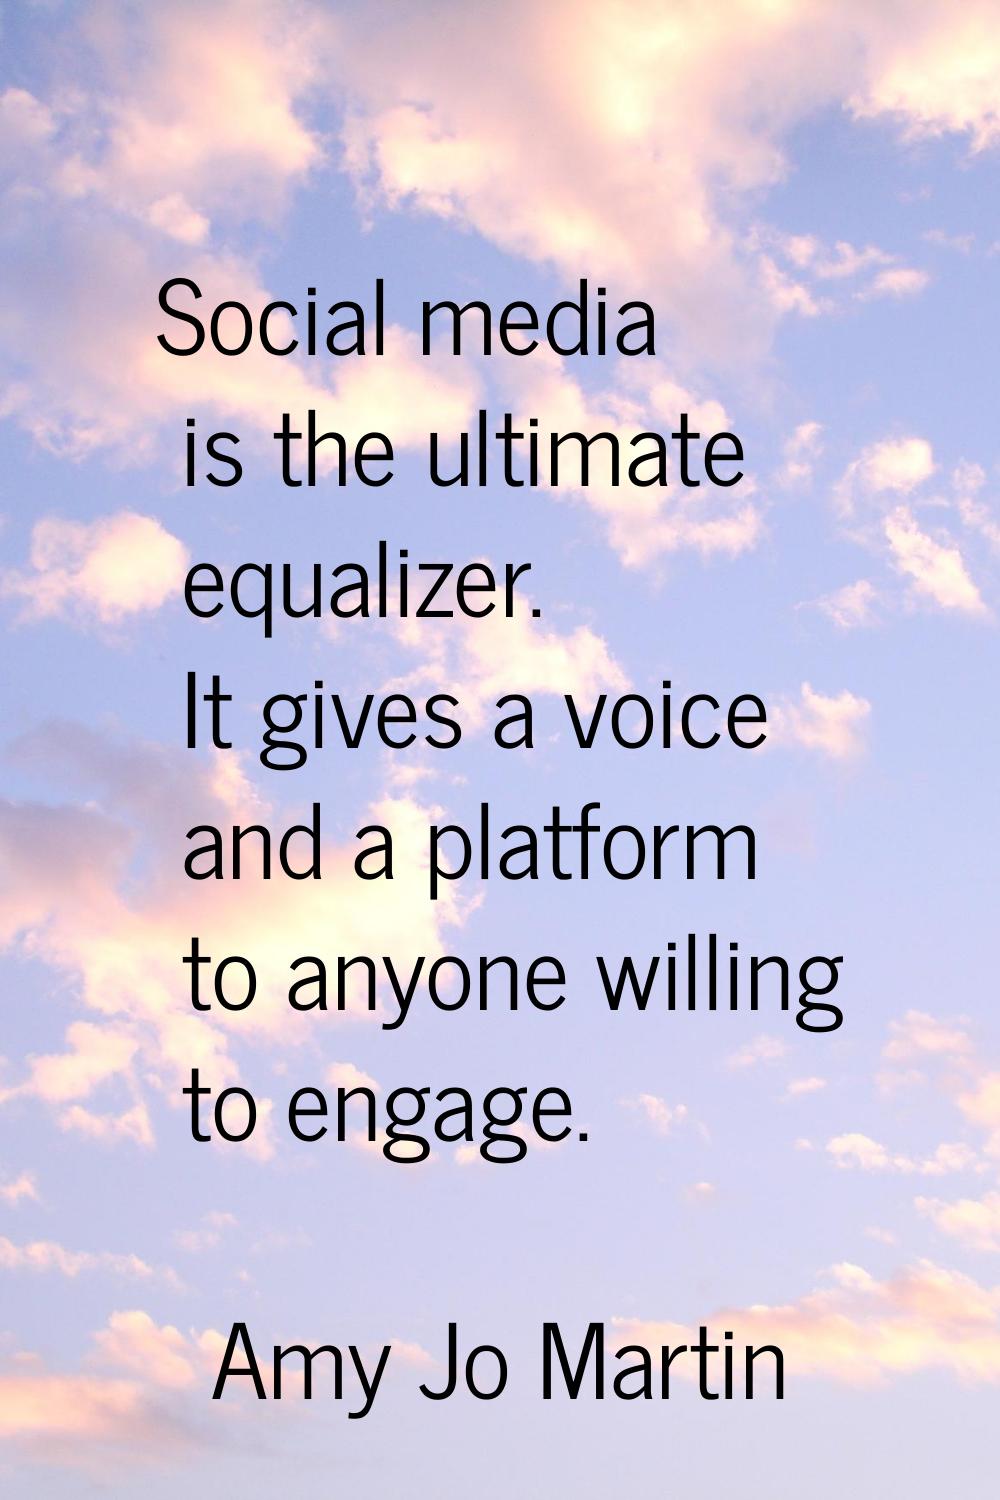 Social media is the ultimate equalizer. It gives a voice and a platform to anyone willing to engage